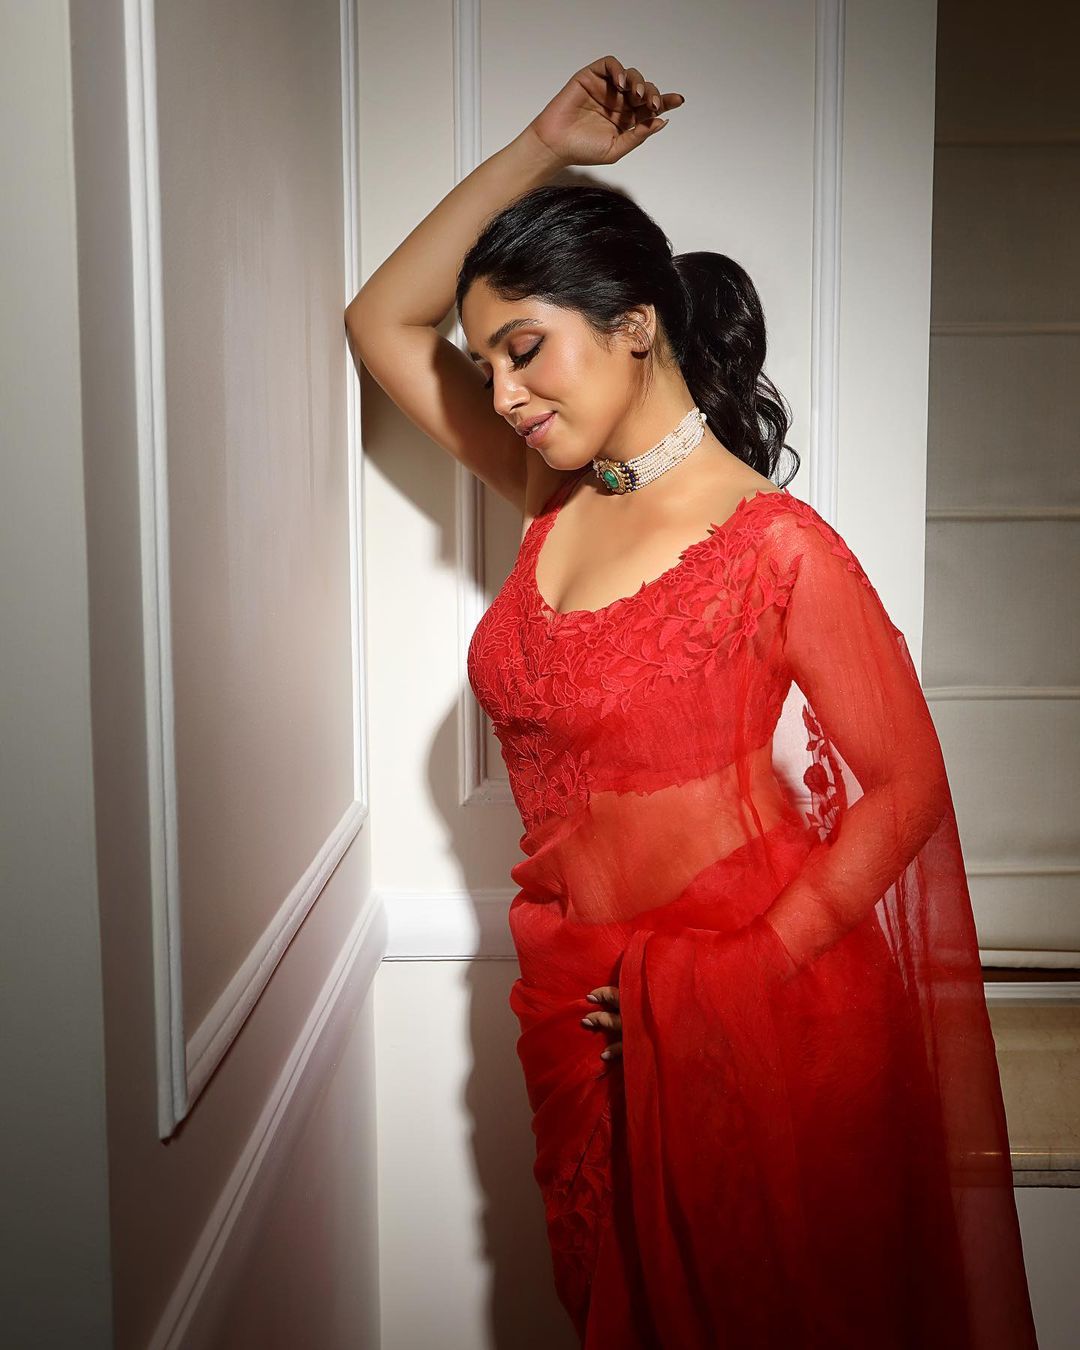 Bhumi Pednekar exudes elegance in the see-through saree and matching blouse.